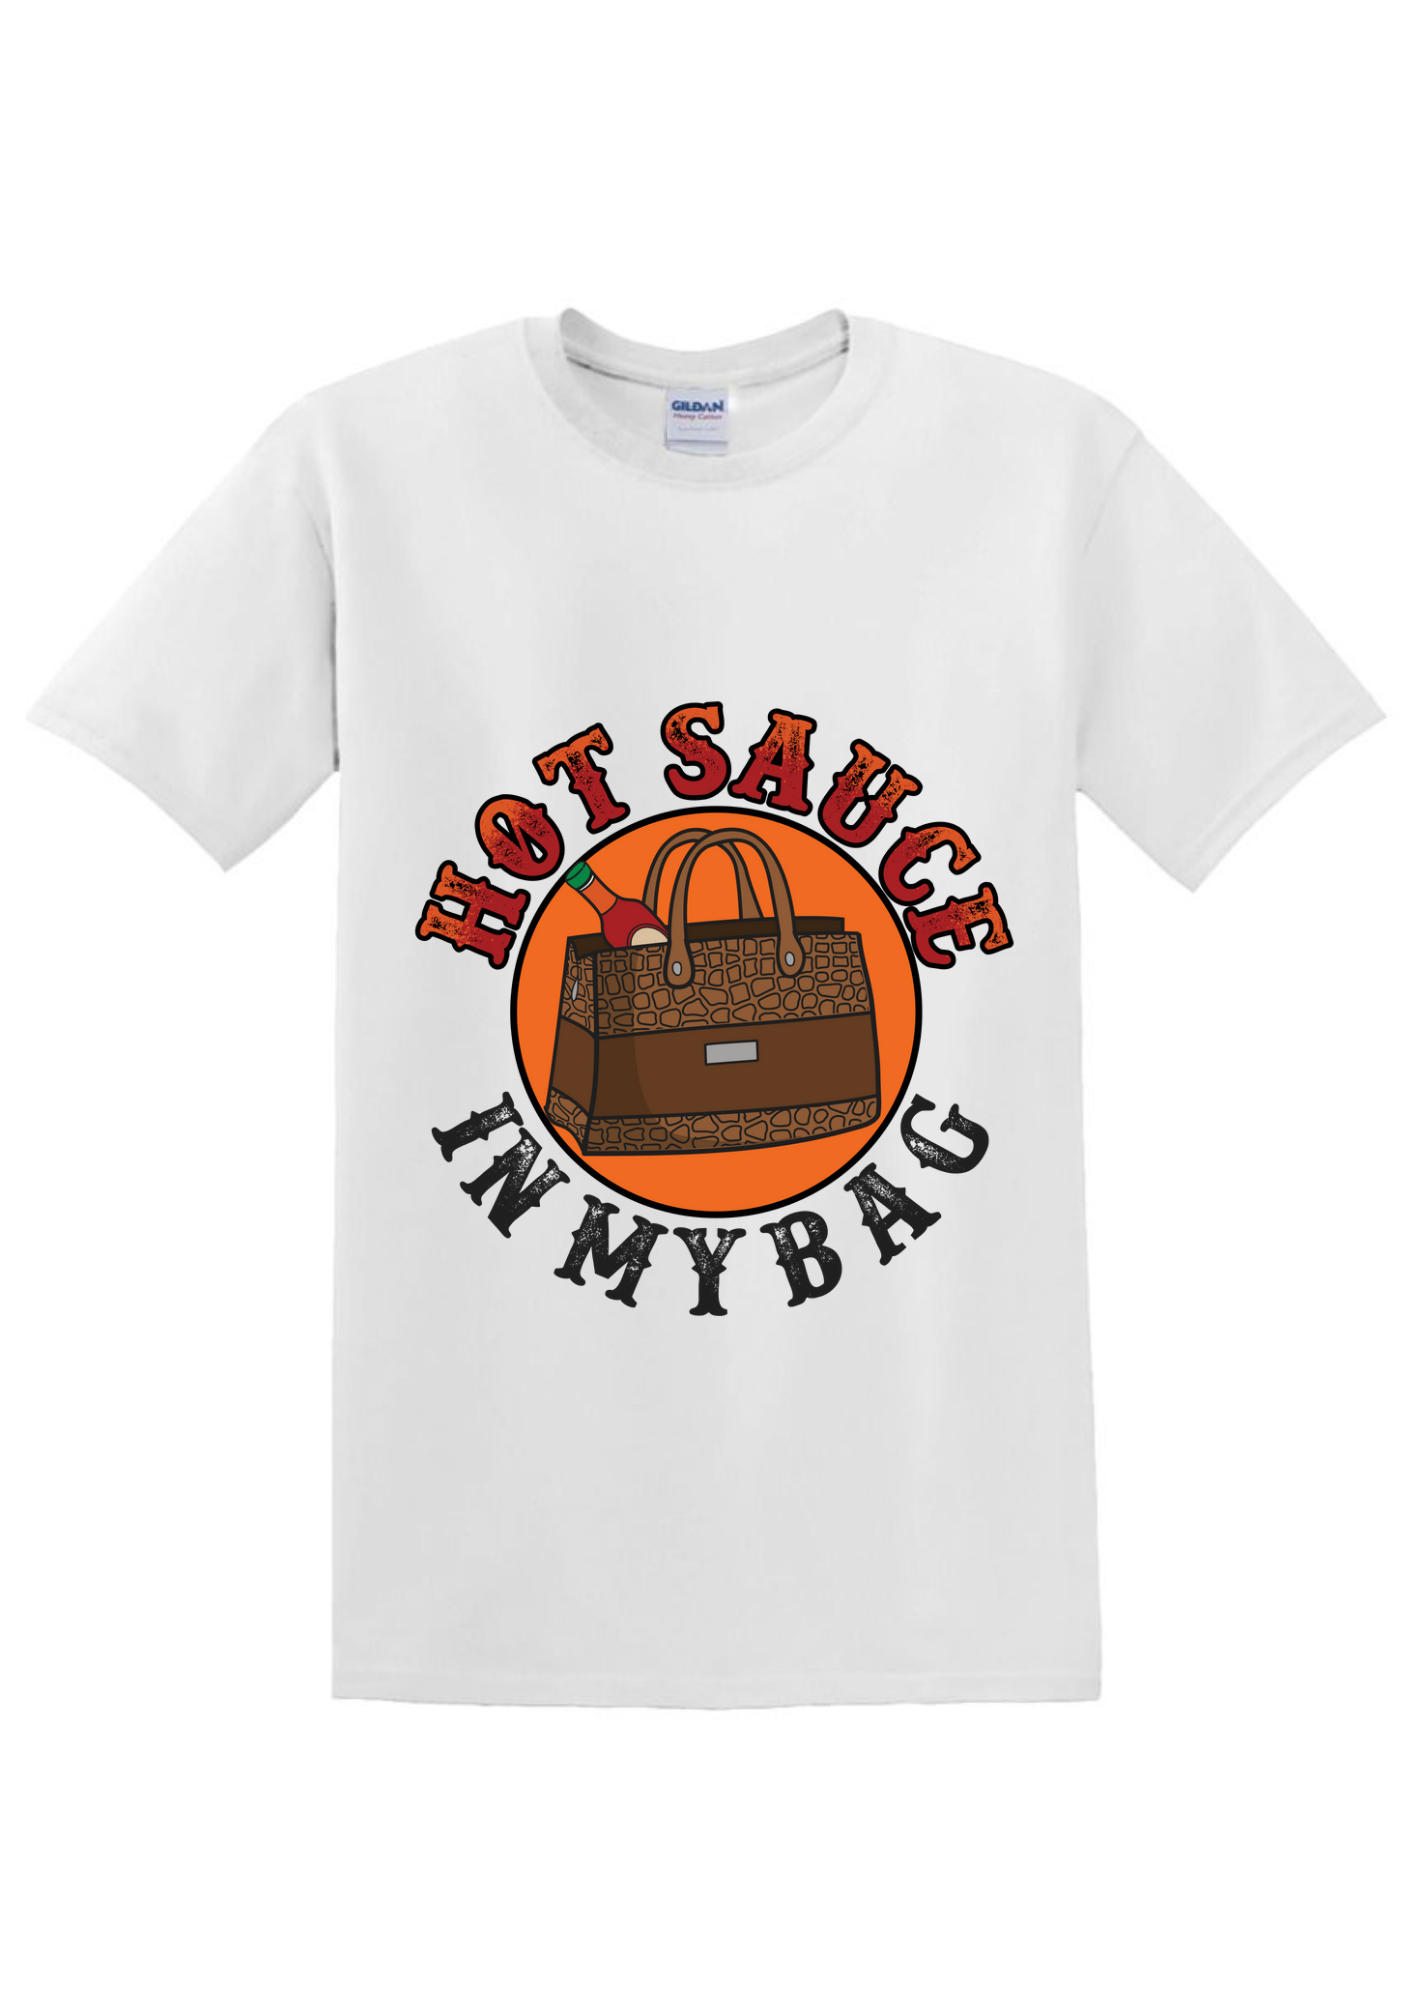 White Hot Sauce in My Bag T-Shirt for Sale